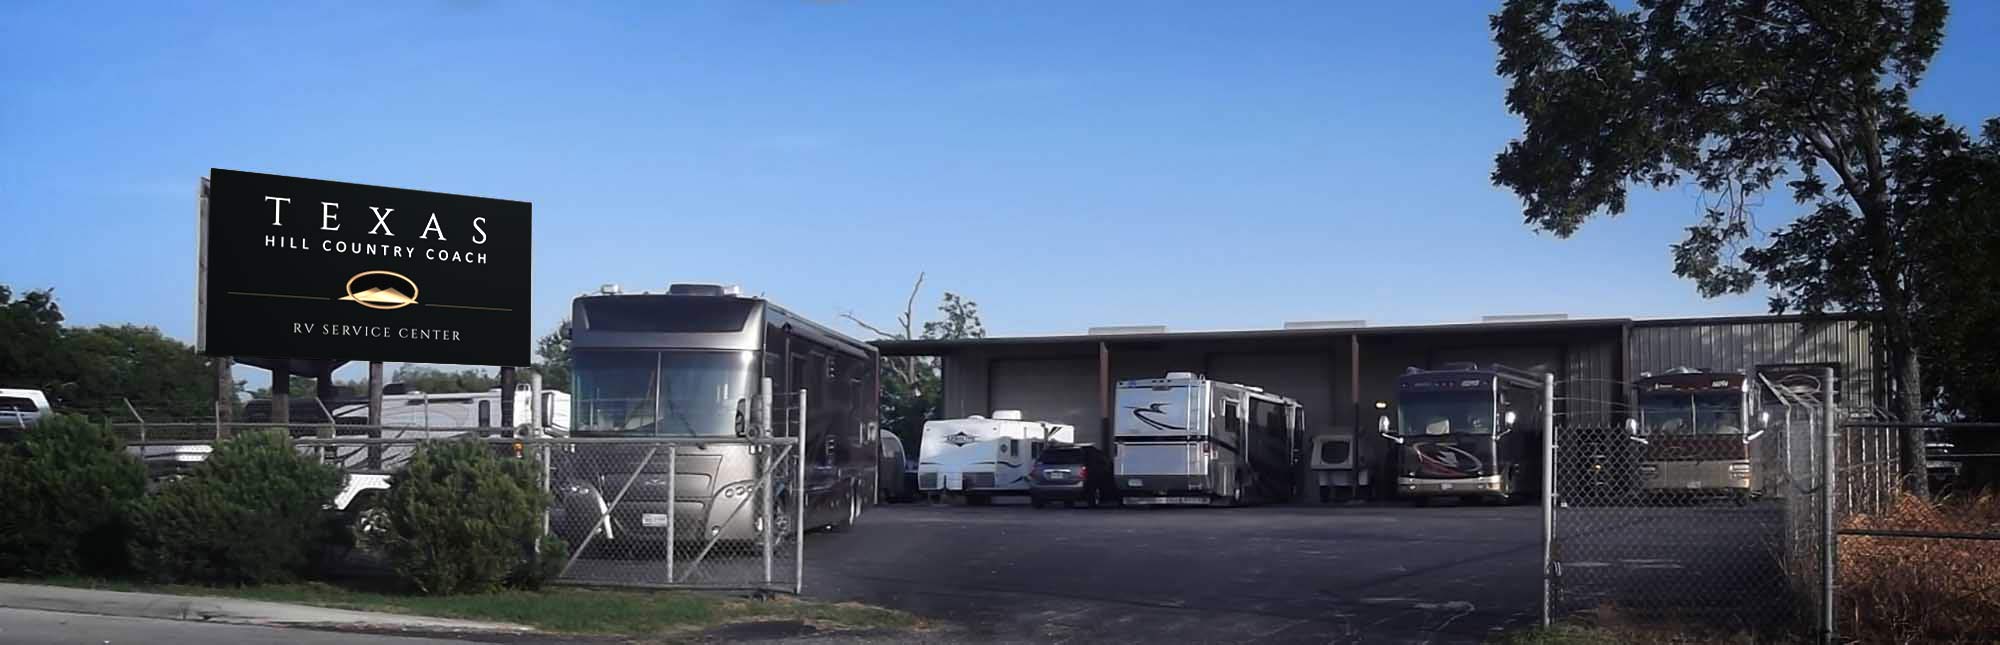 Texas Hill Country Coach - RV Service and Repair in San Antonio and New Braunfels